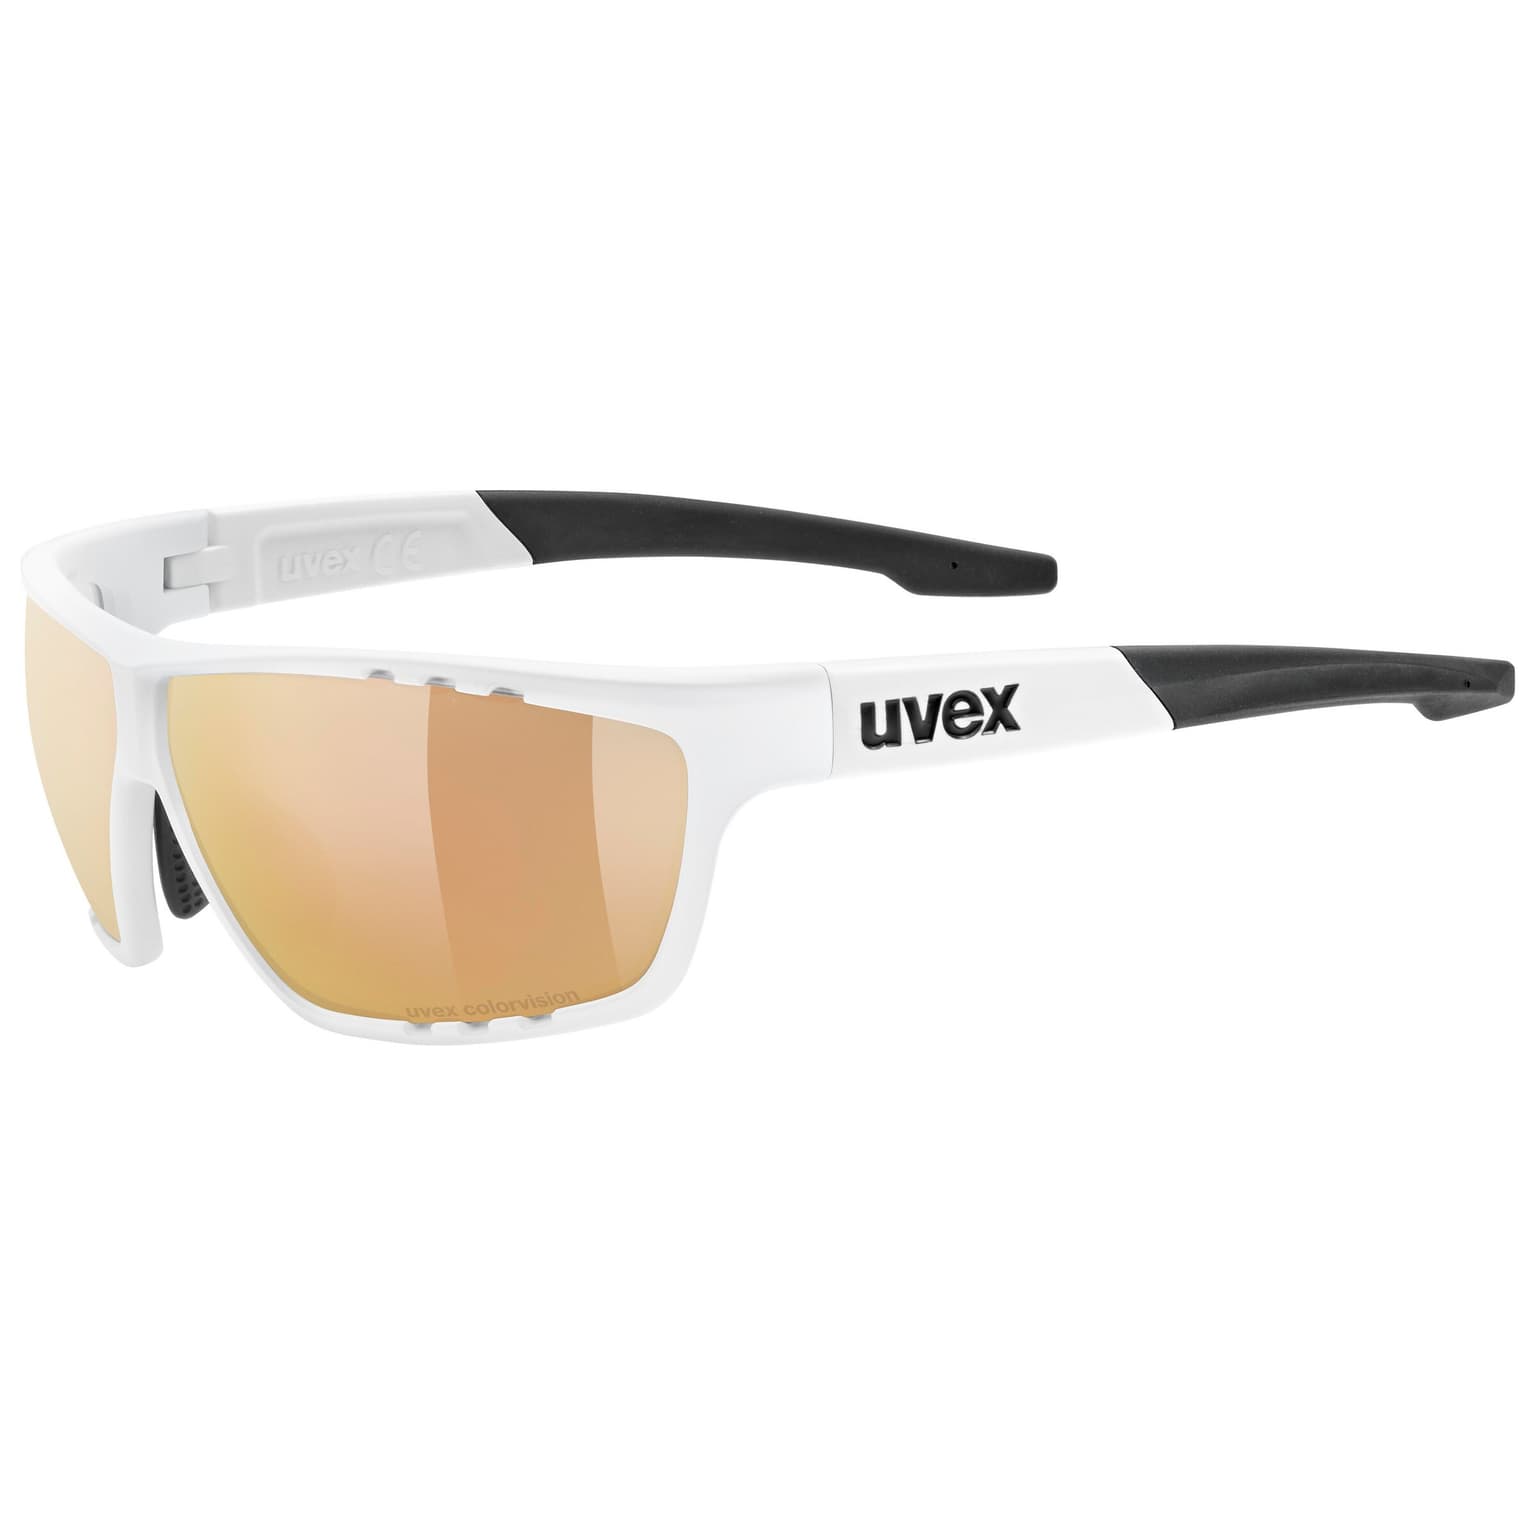 Uvex Uvex Colorvision Sportbrille weiss 1